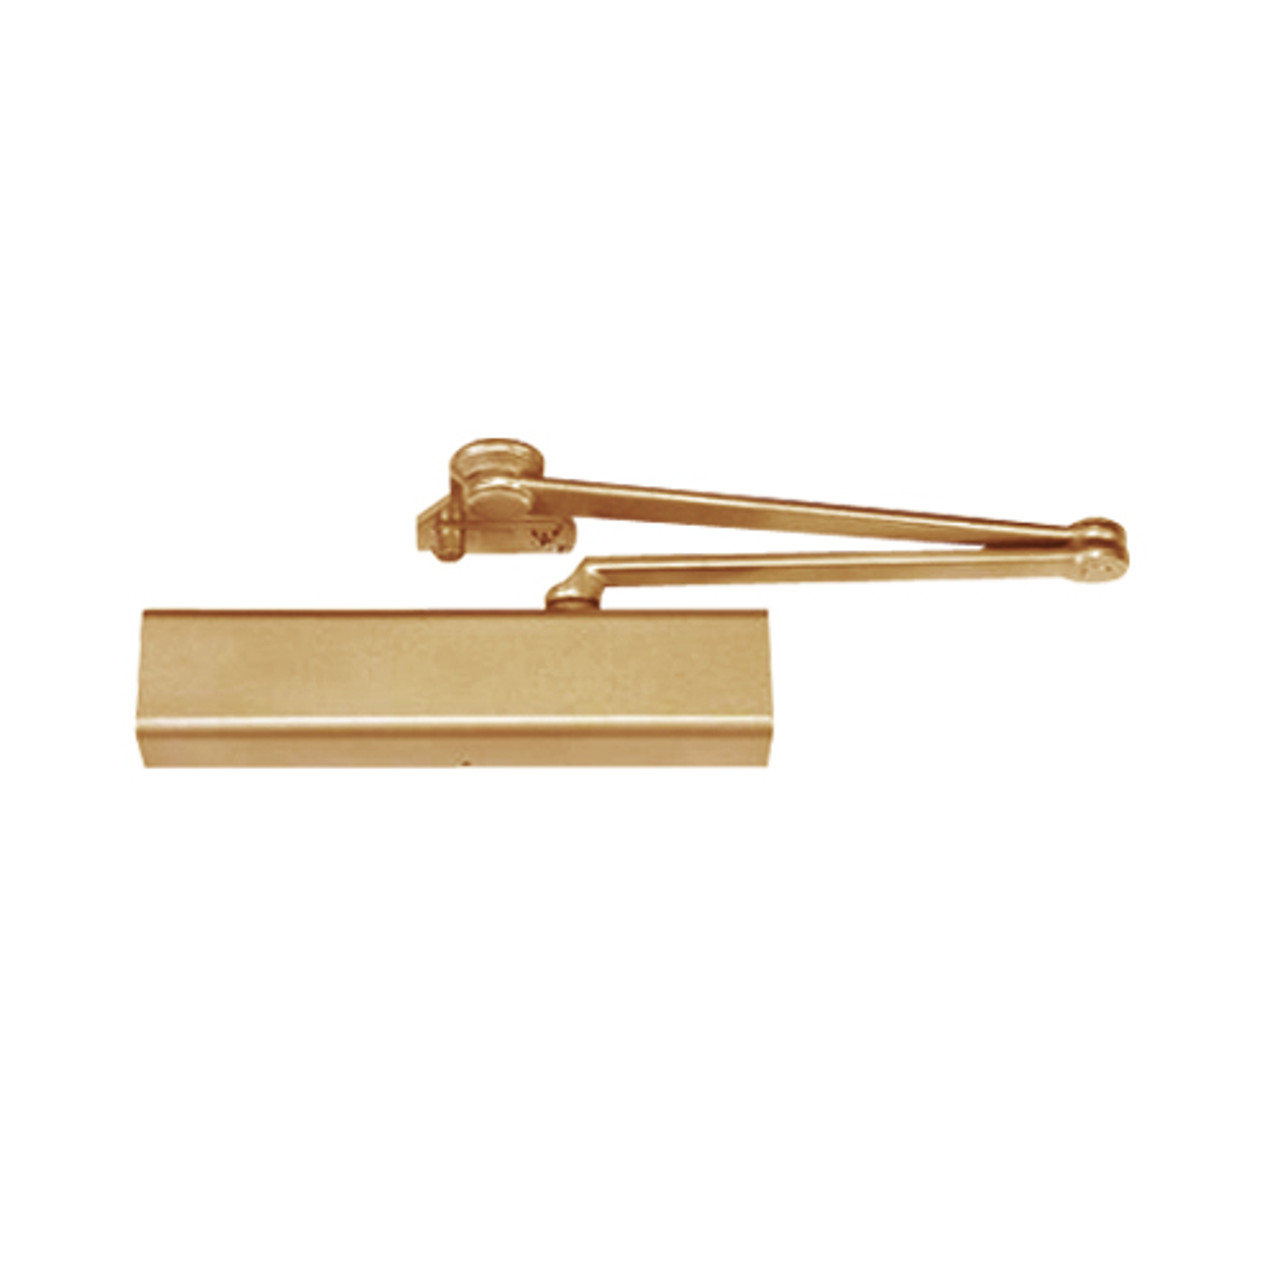 CLP8501DA-691 Norton 8000 Series Full Cover Non-Hold Open Door Closers with CloserPlus Arm in Dull Bronze Finish